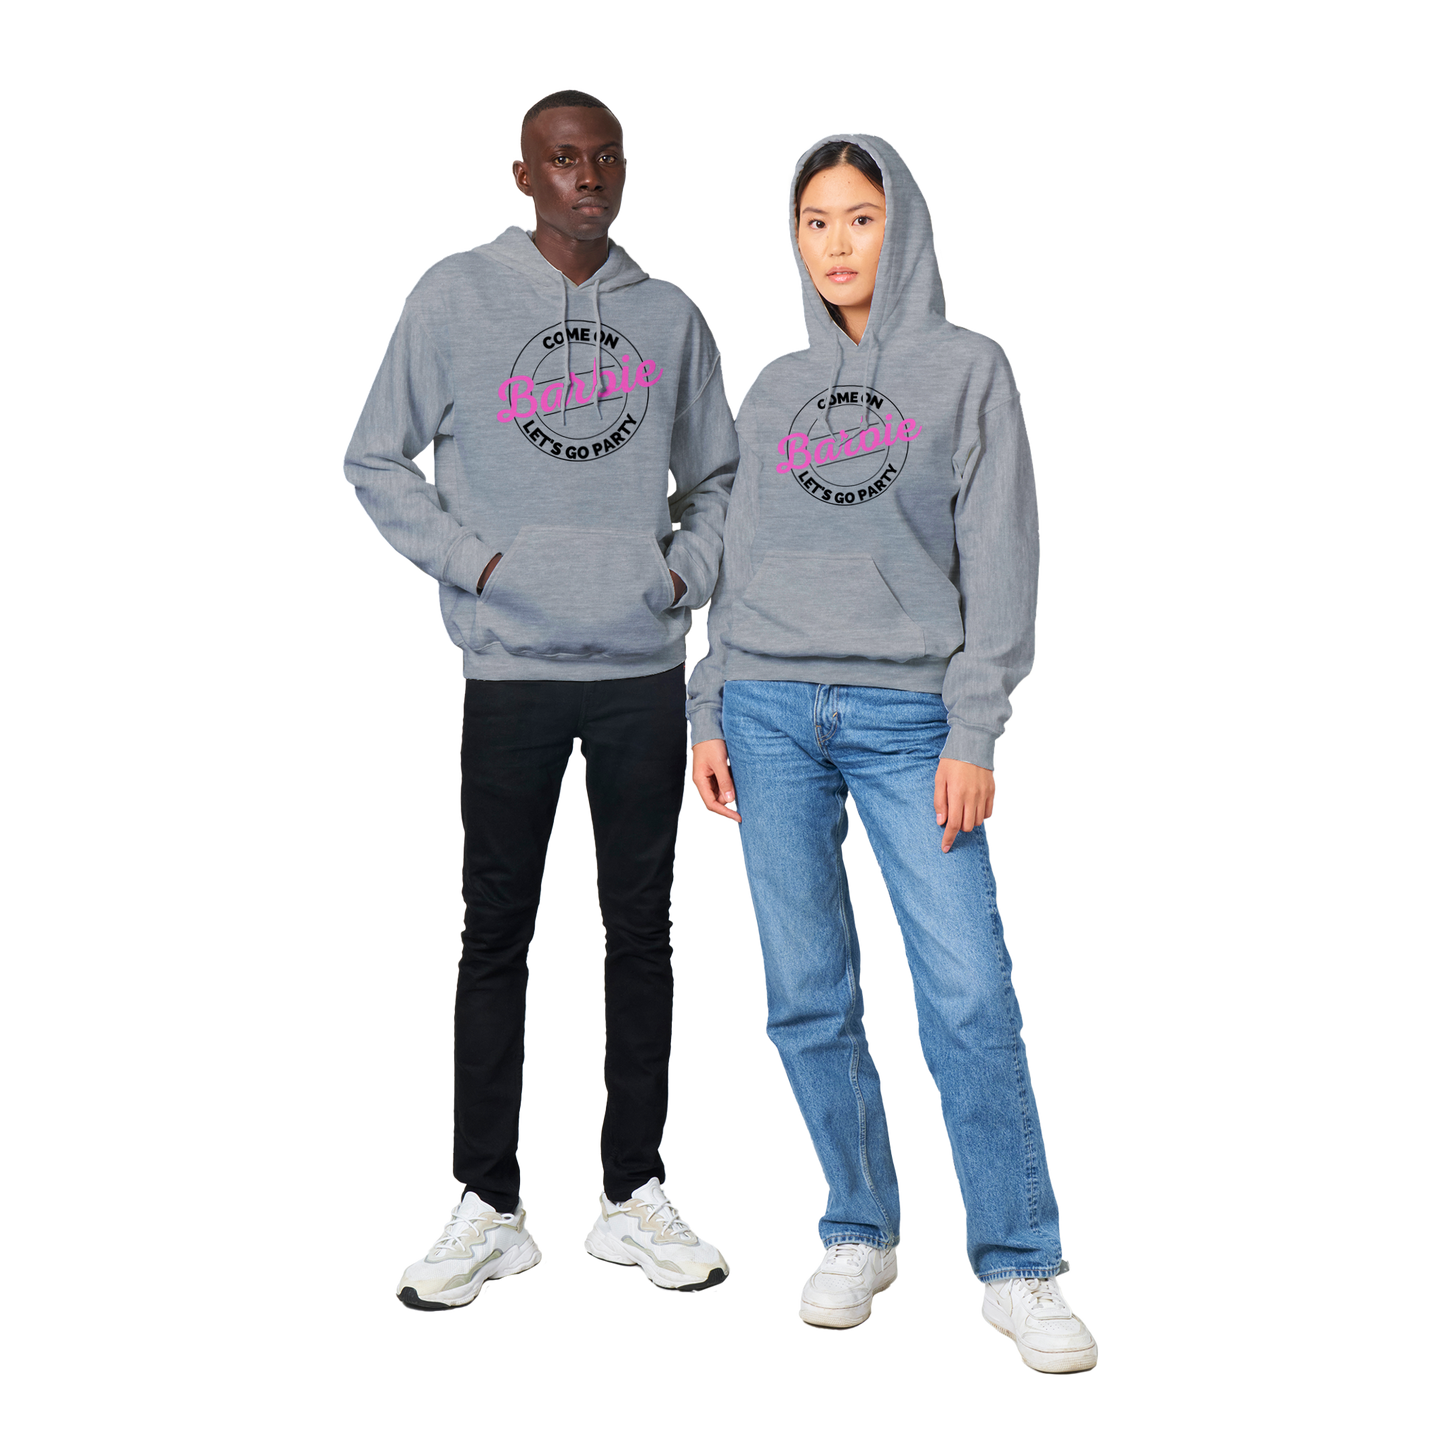 Cmon Barbie Lets Go Party Come on Barbie - Classic Unisex Pullover Hoodie